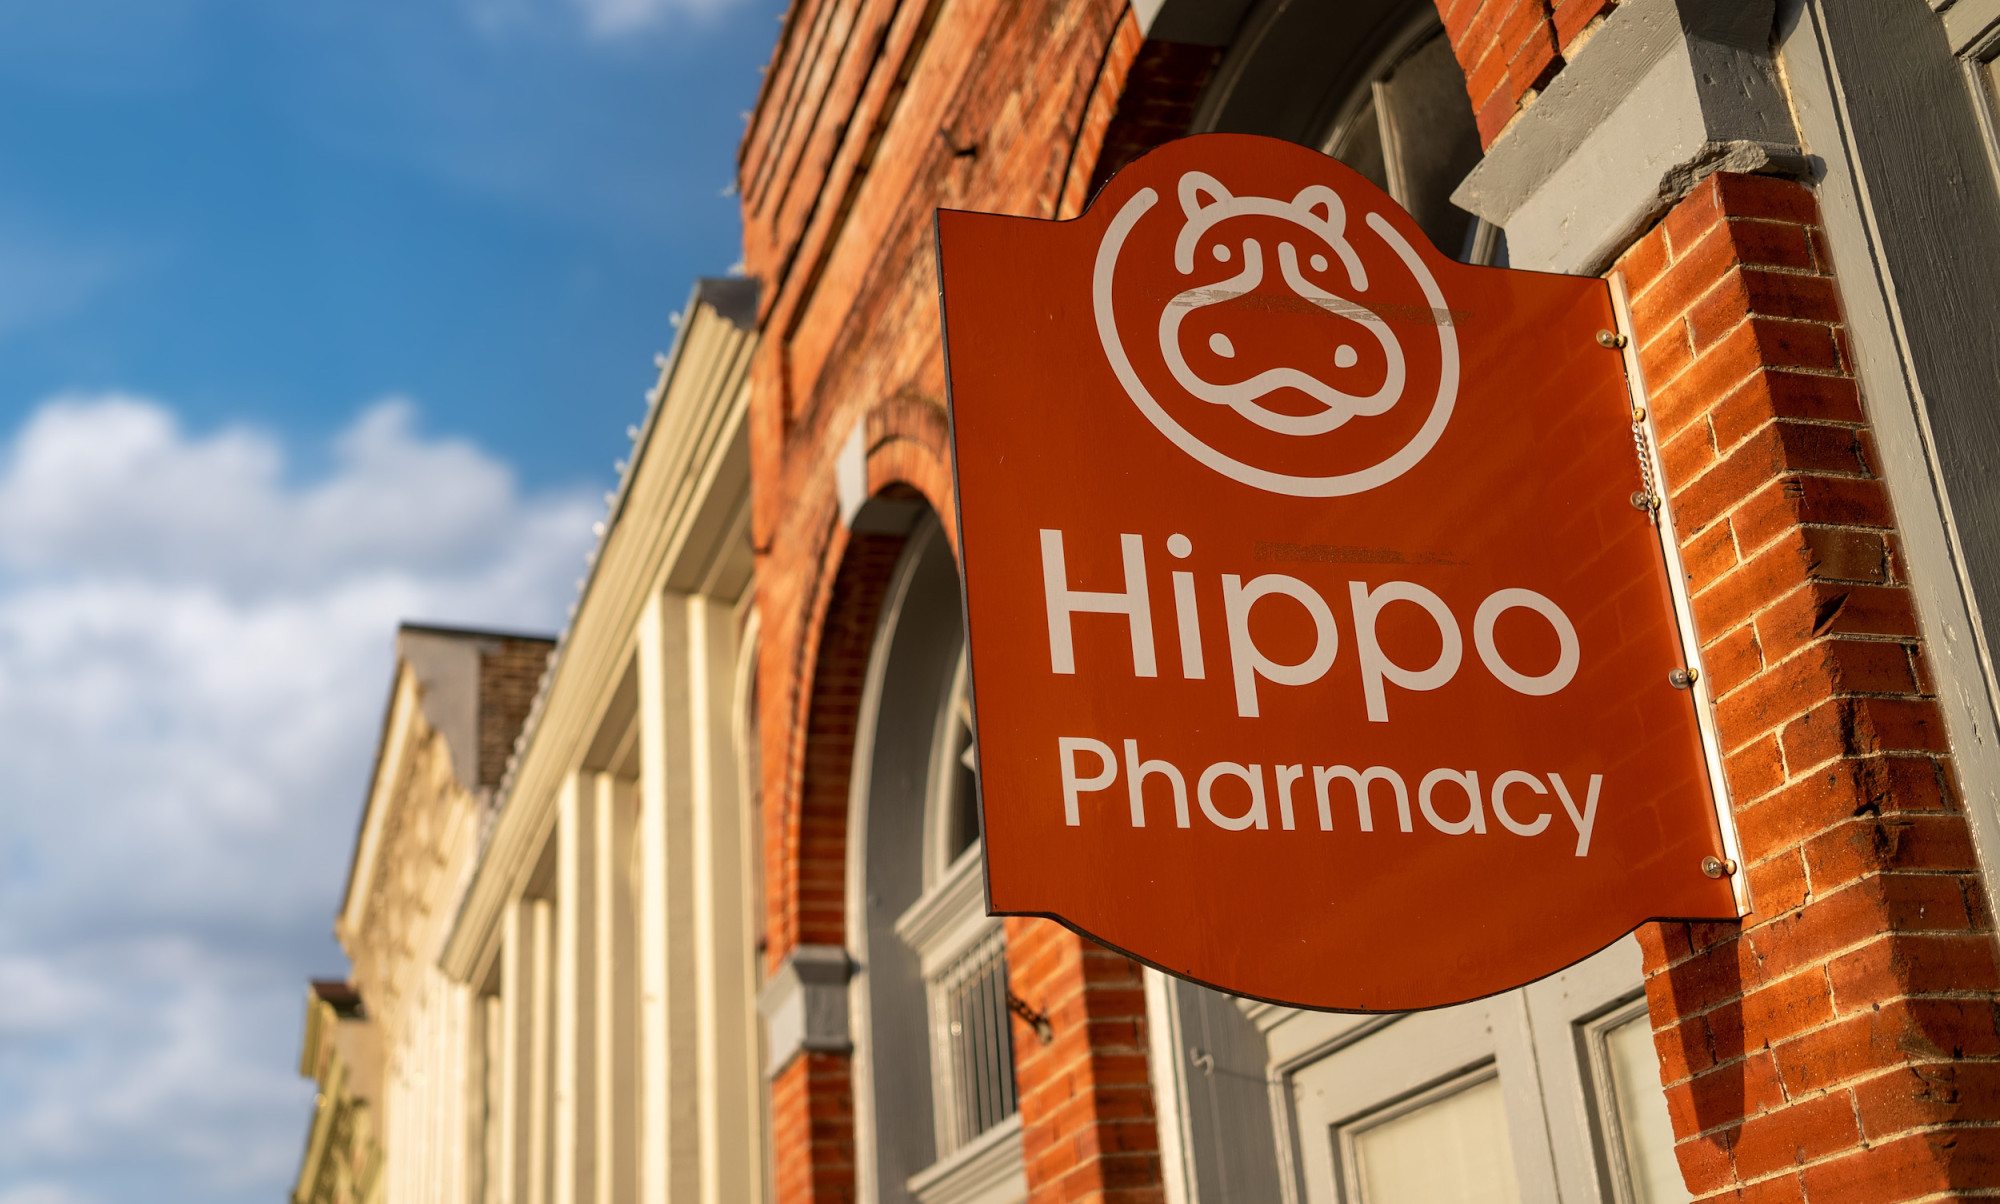 Photo of Hippo Pharmacy sign on storefront.